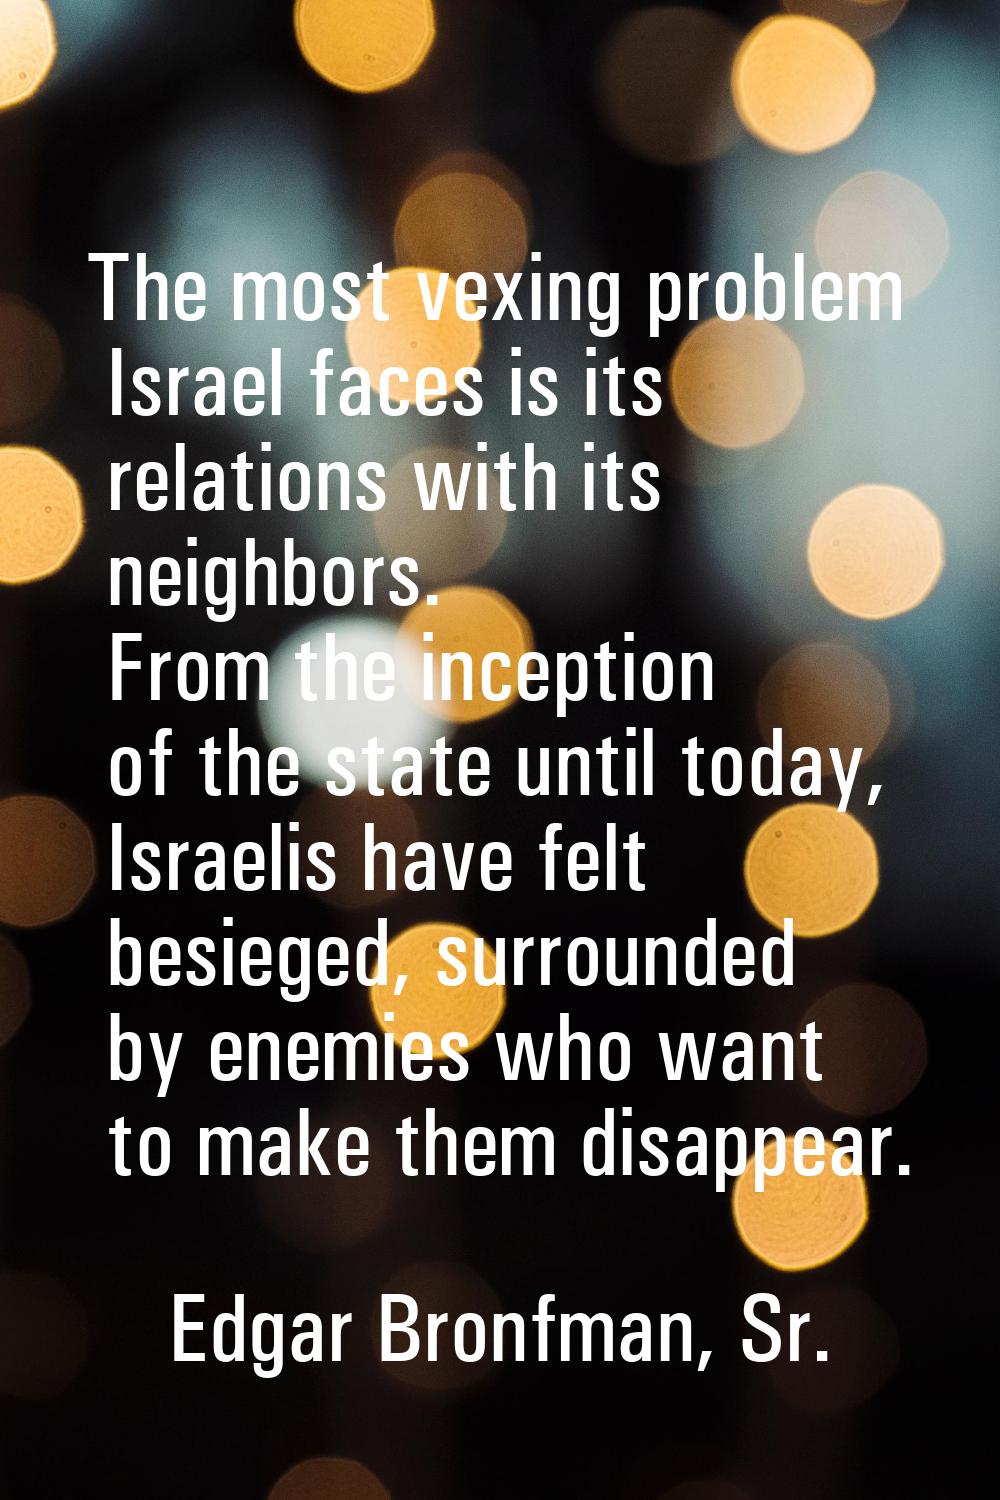 The most vexing problem Israel faces is its relations with its neighbors. From the inception of the